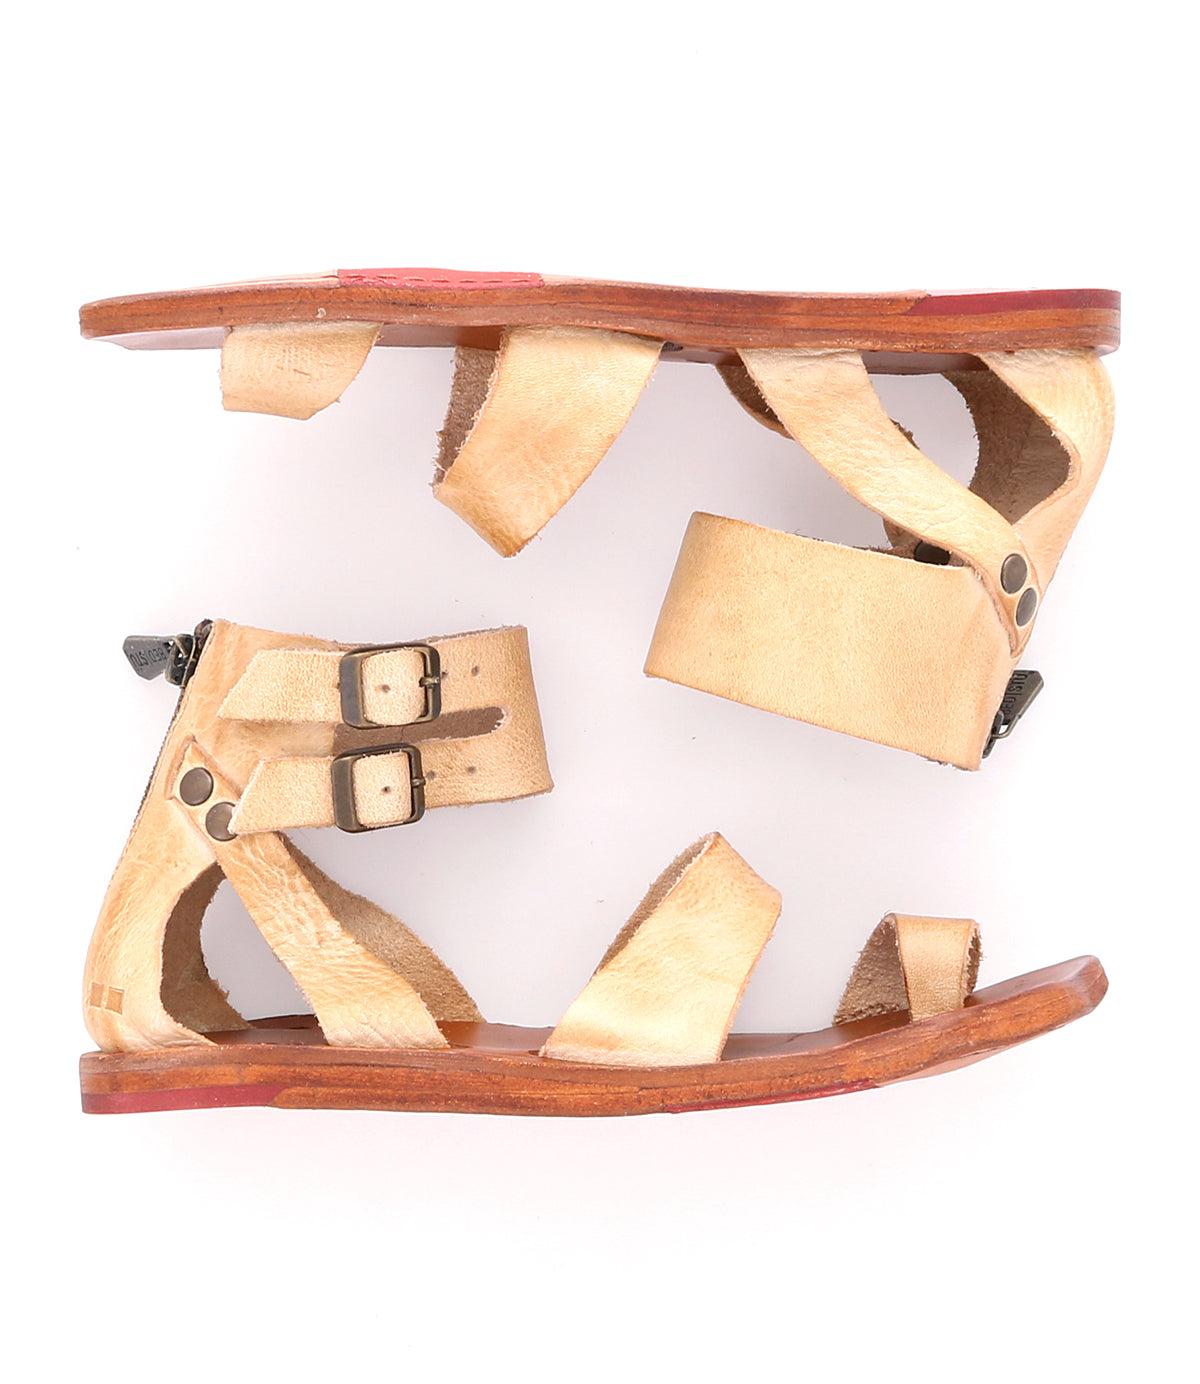 A pair of Bed Stu sandals with straps and buckles on a white background.